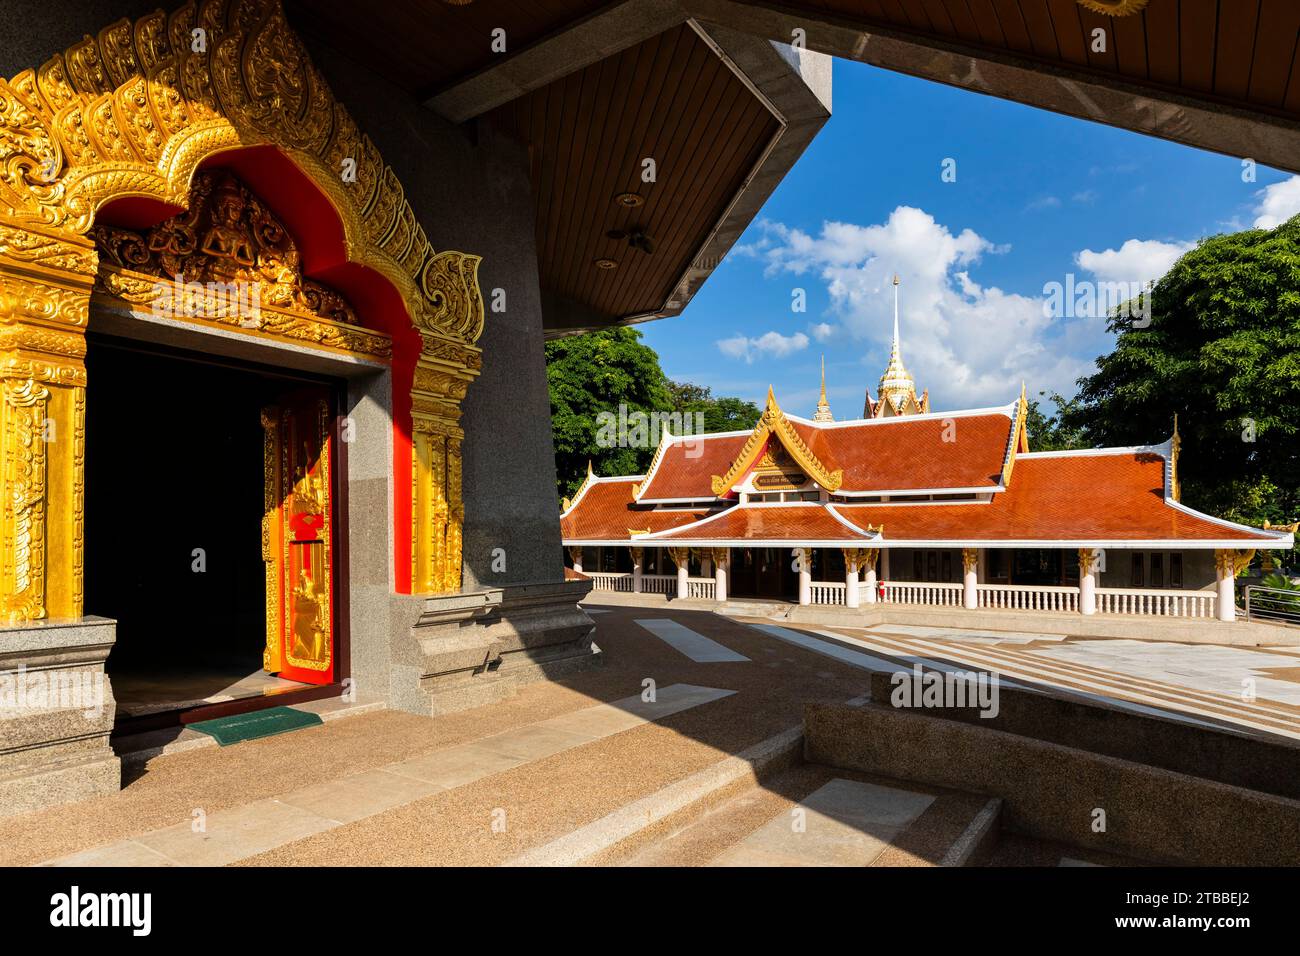 Wat Phothisomphon(Wat Pothisomphon, Wat Phothisaphorn), pagoda and view, city center, Udon Thani, Isan, Thailand, Southeast Asia, Asia Stock Photo